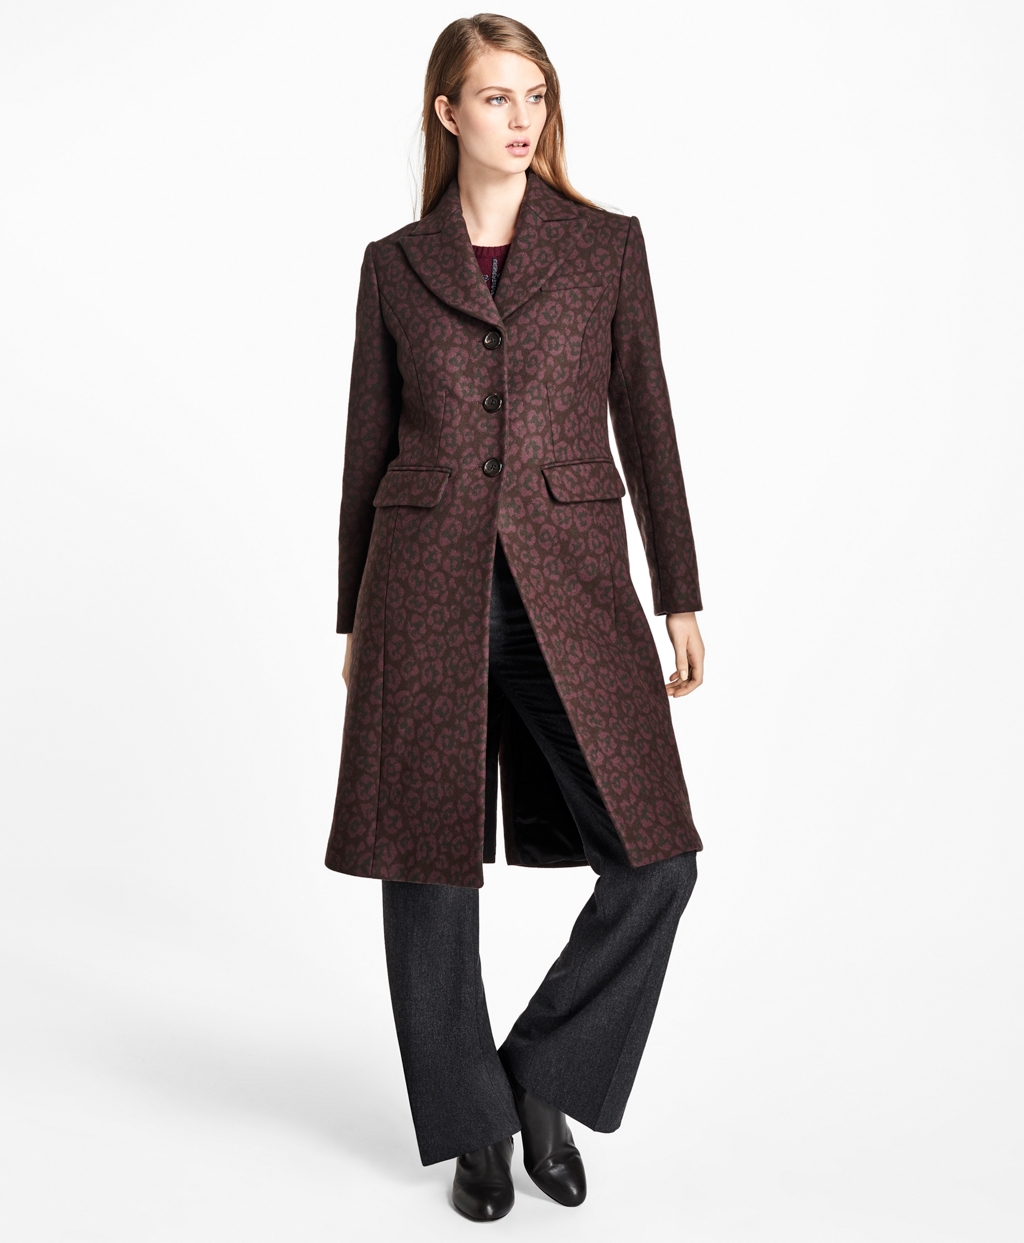 Women's Outerwear and Coat Sale | Brooks Brothers